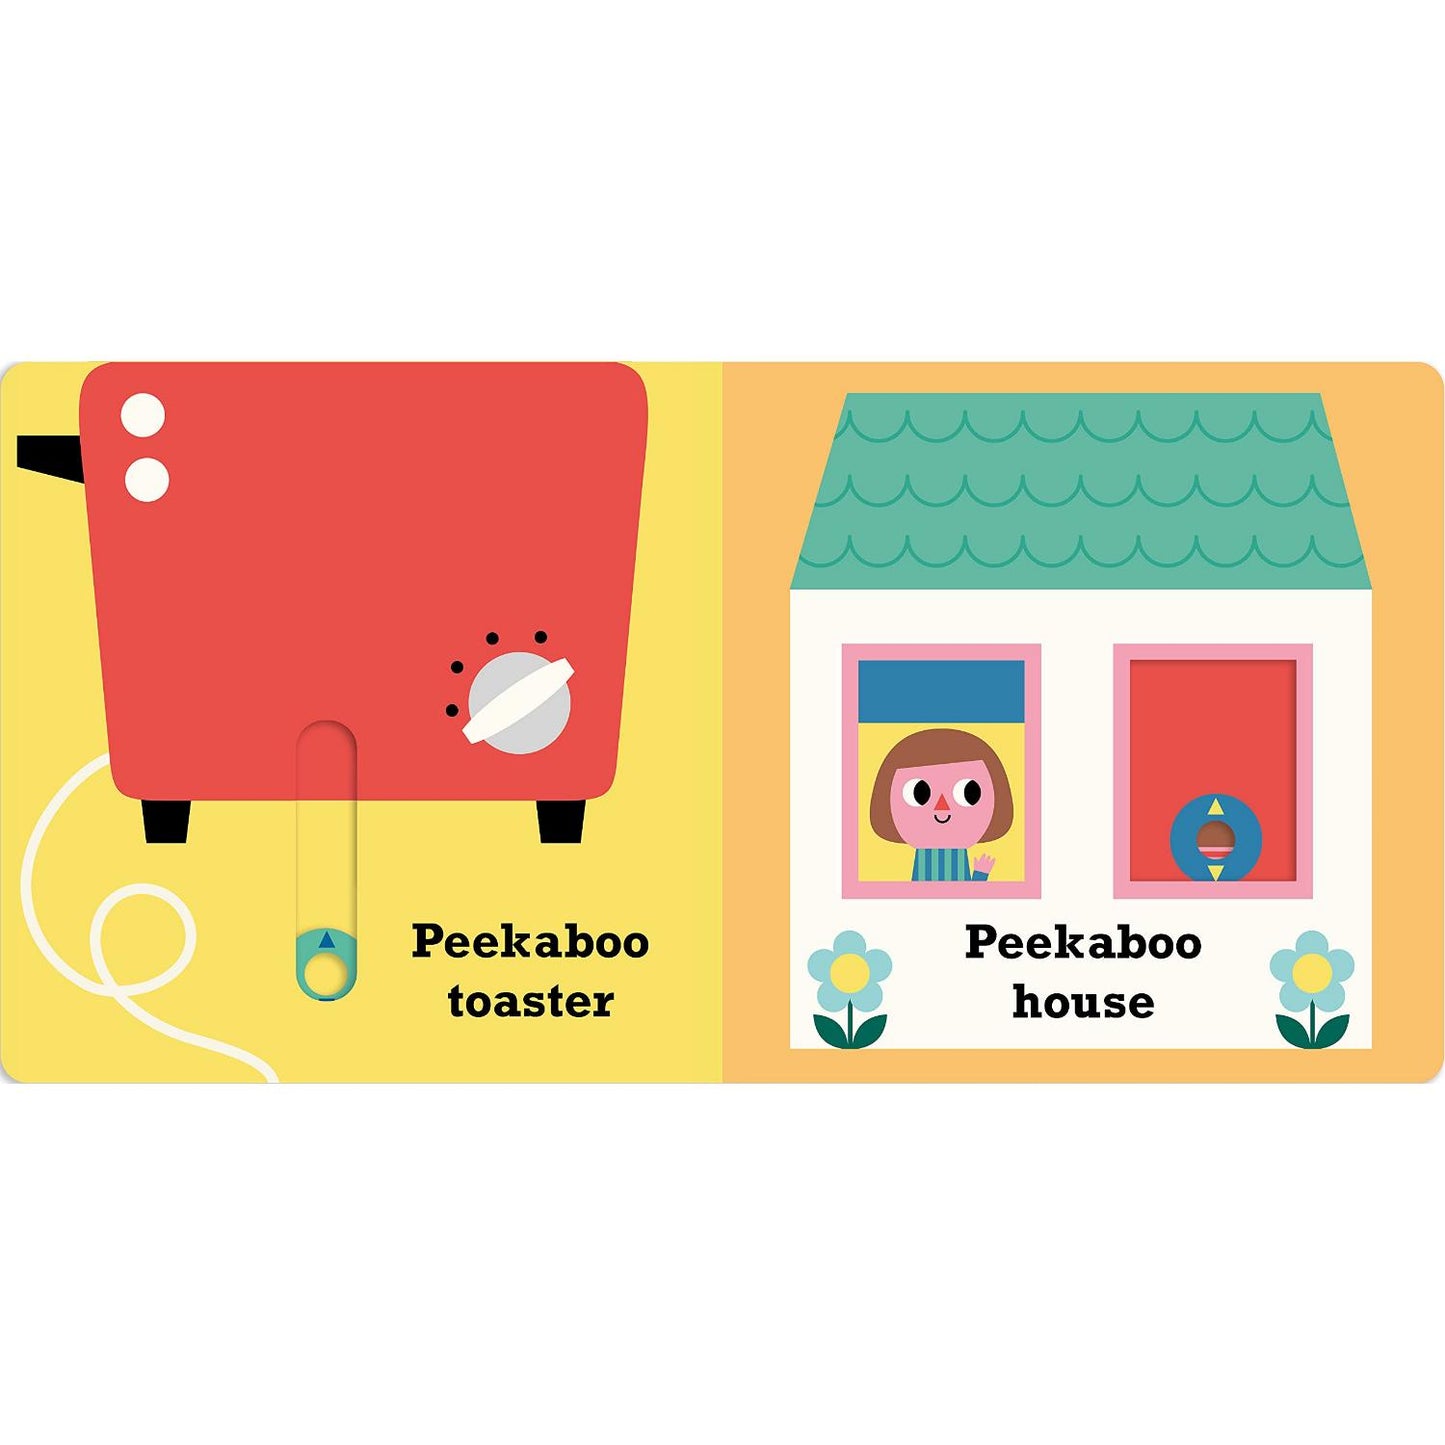 Peekaboo House | Interactive Board Book for Babies & Toddlers